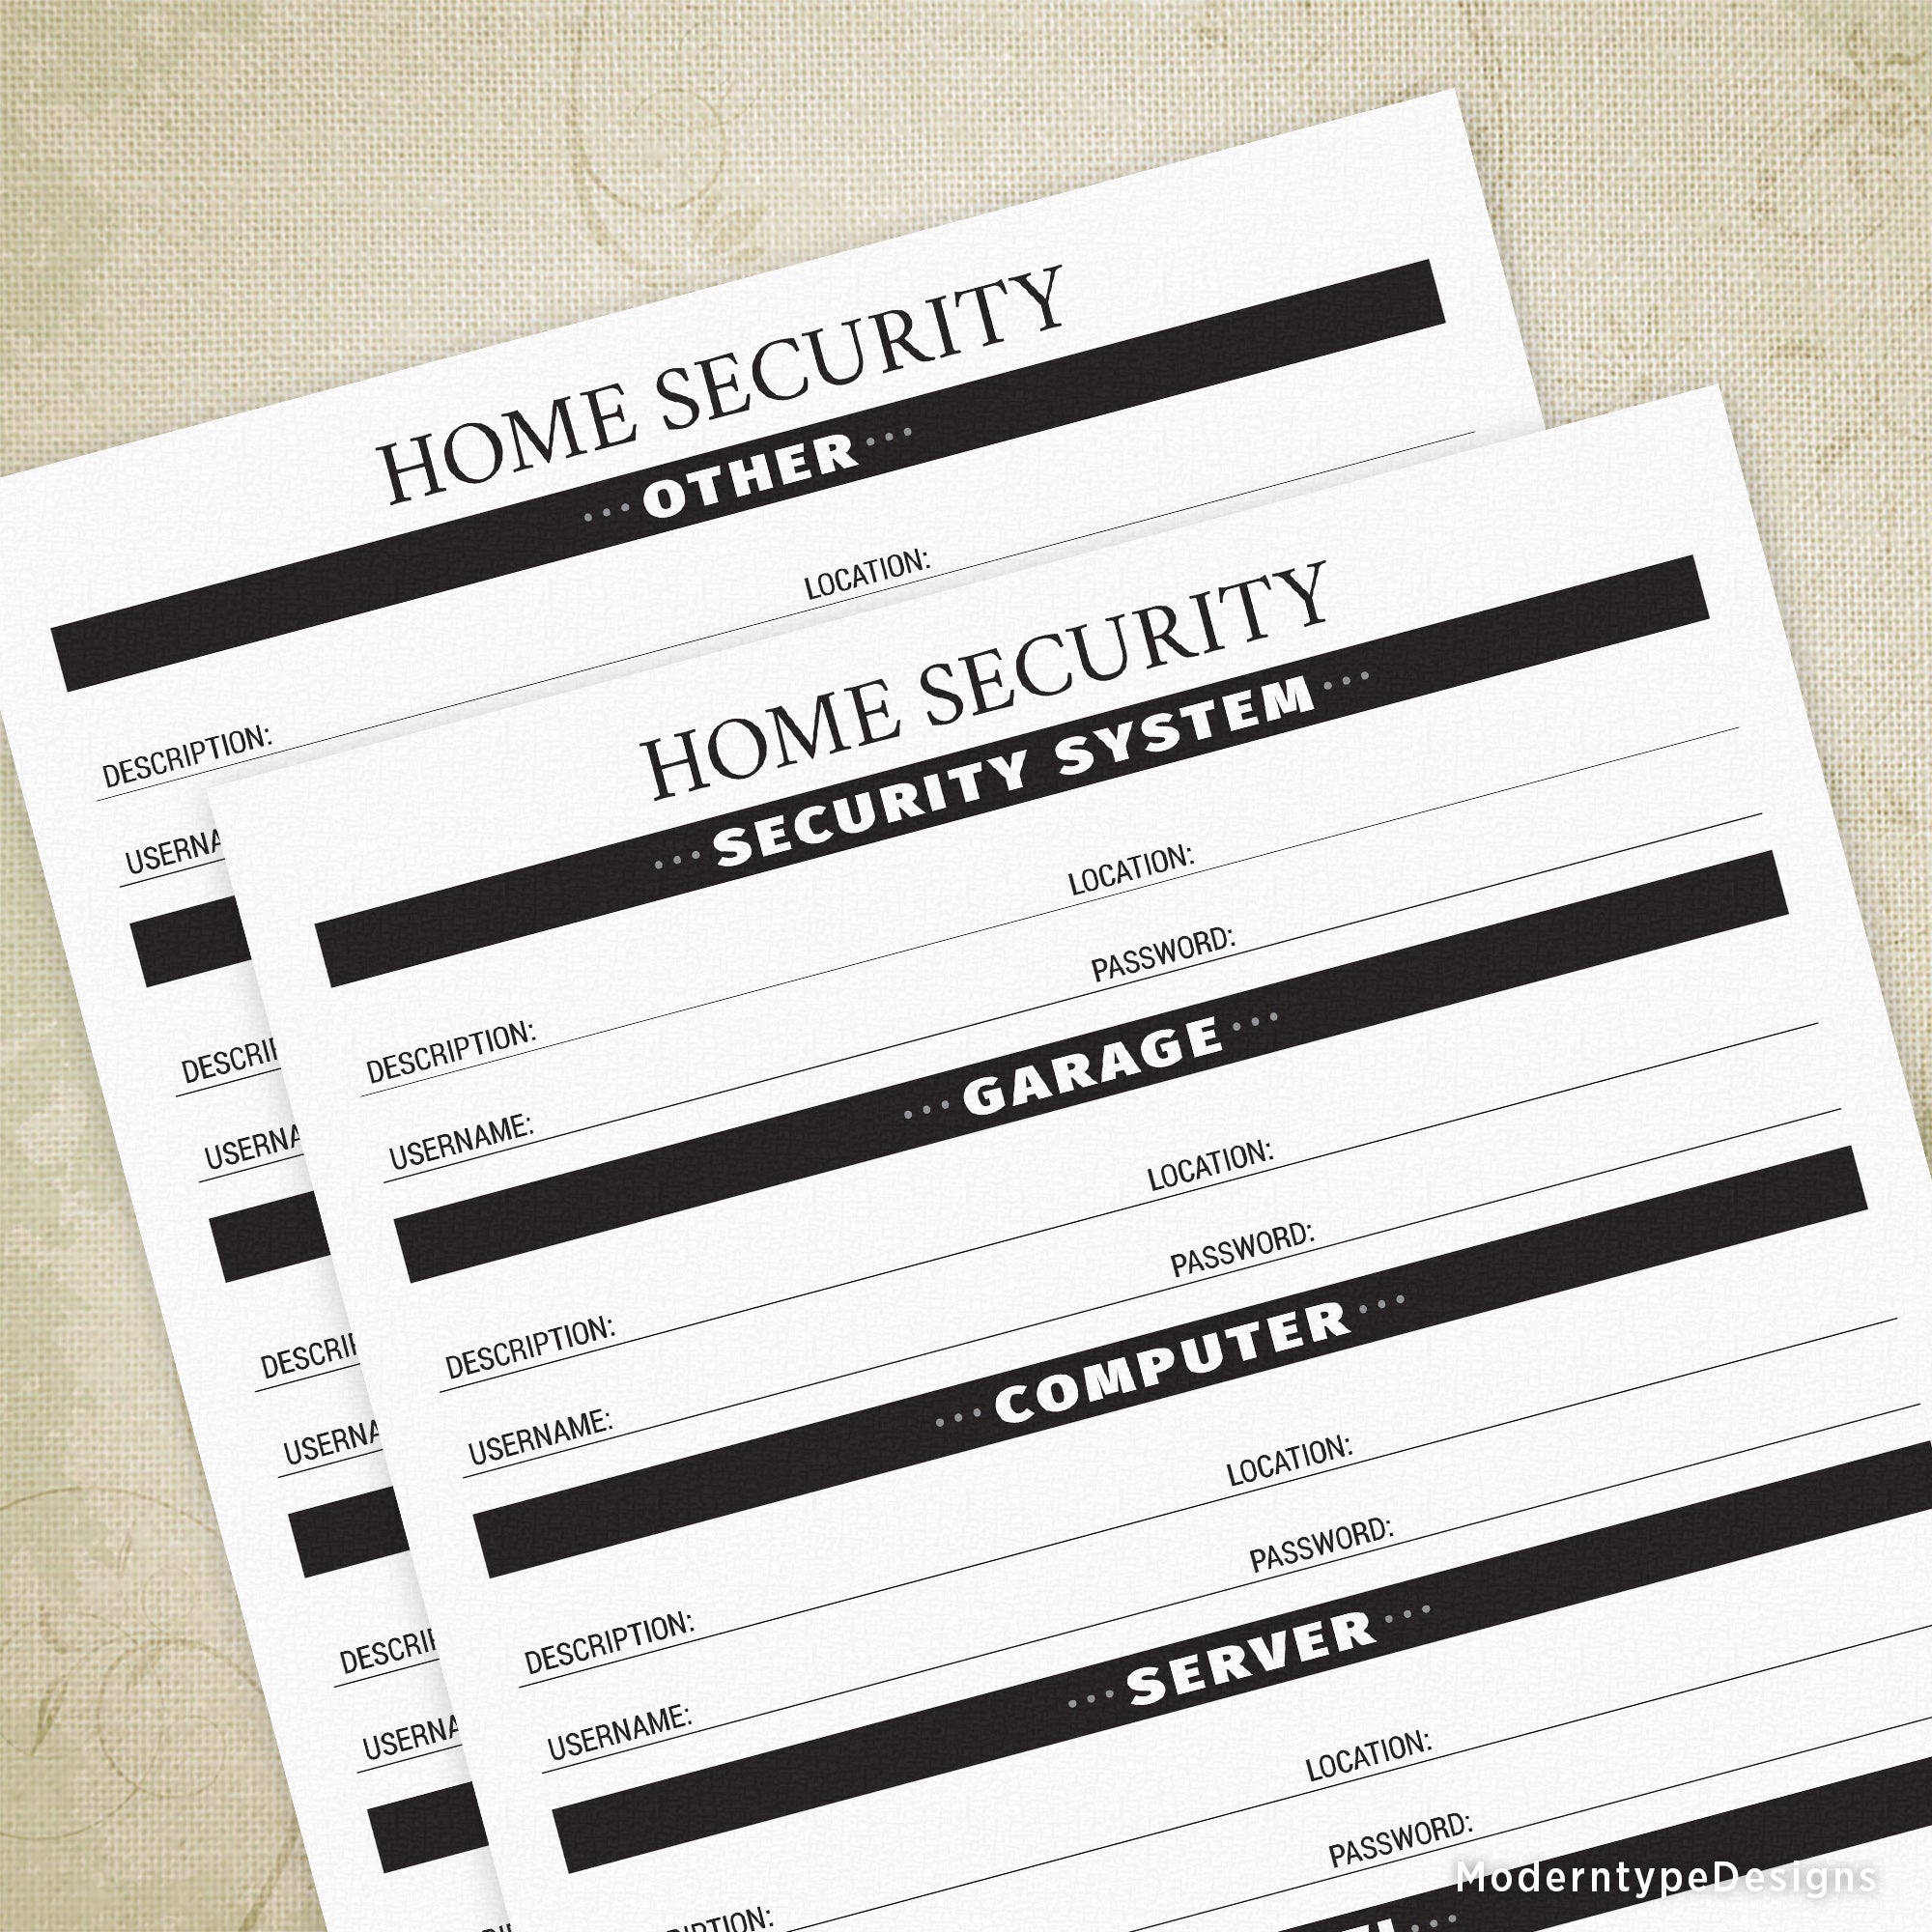 Home Security Printable - End of Life